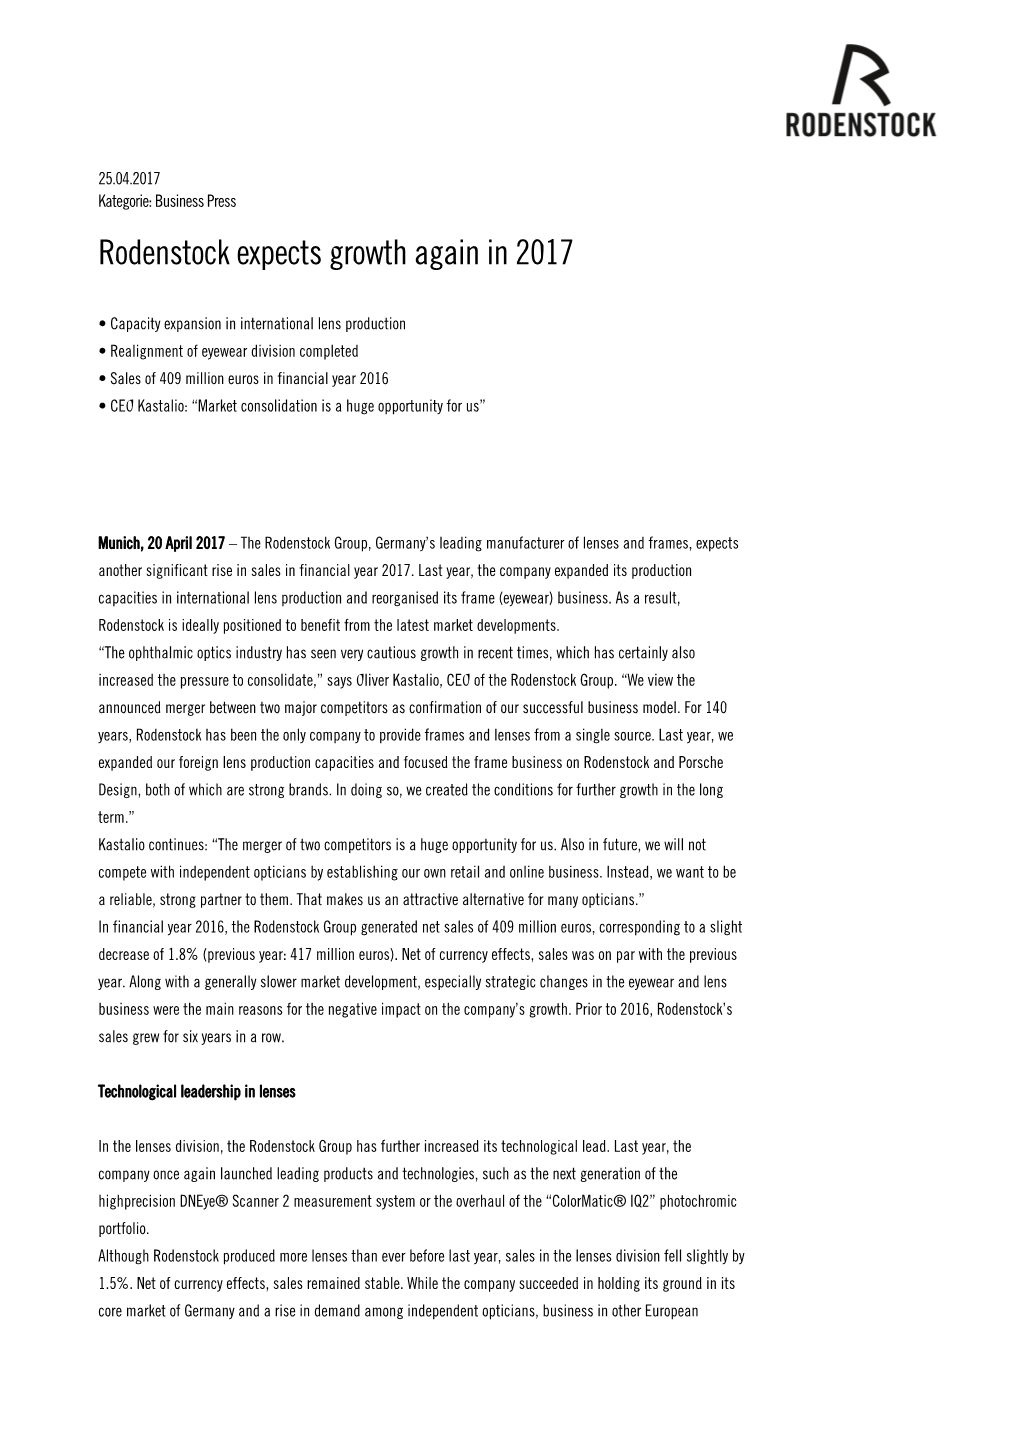 Rodenstock Expects Growth Again in 2017